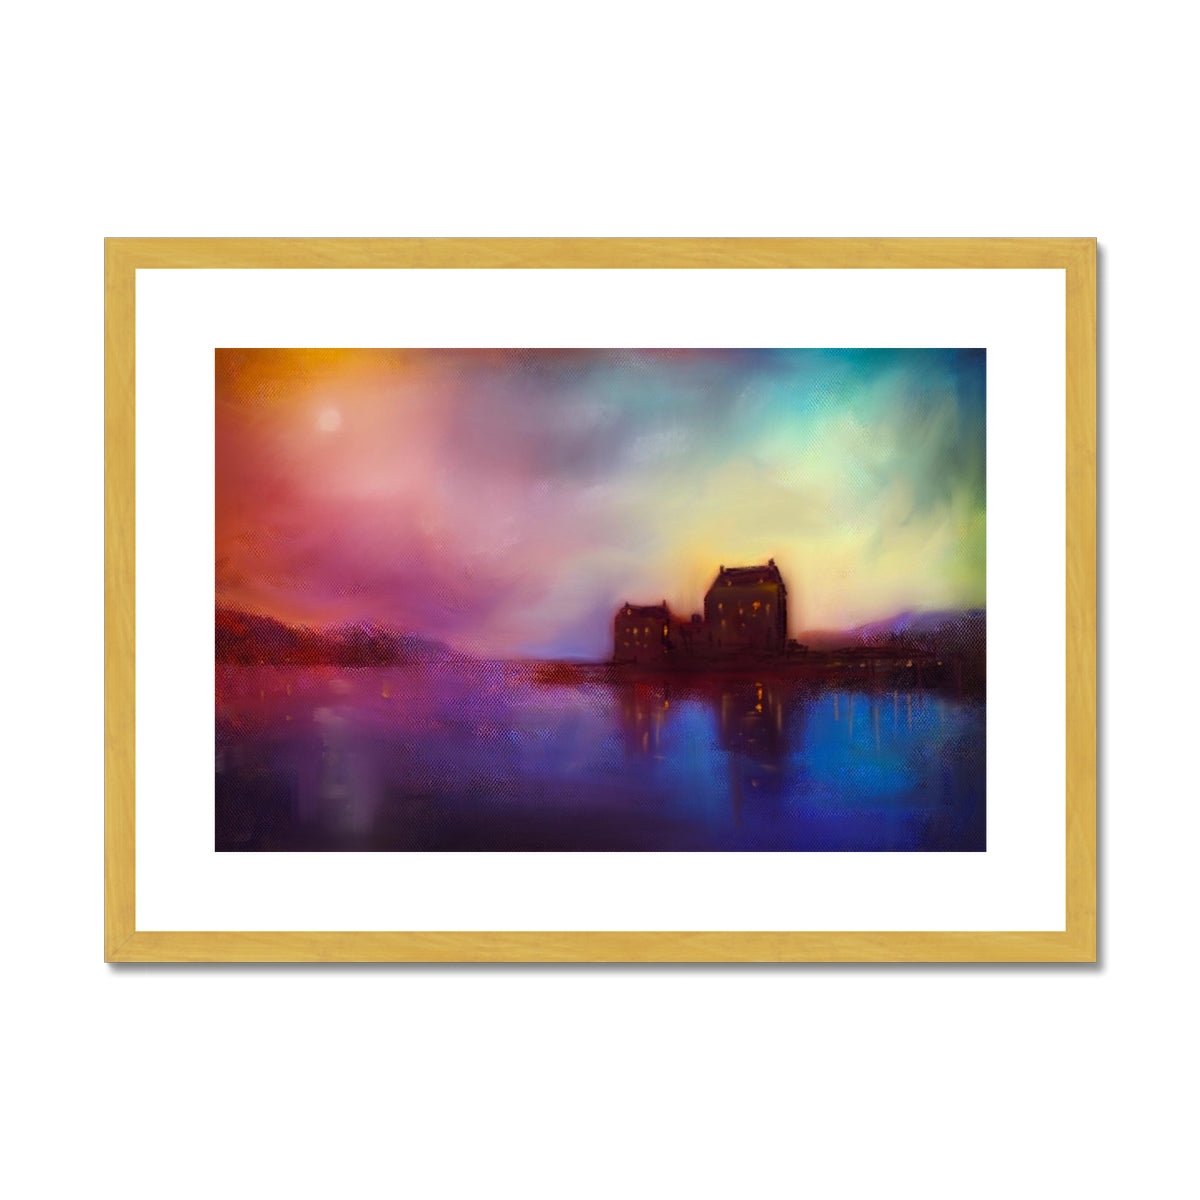 Eilean Donan Castle Sunset Painting | Antique Framed & Mounted Prints From Scotland-Antique Framed & Mounted Prints-Historic & Iconic Scotland Art Gallery-A2 Landscape-Gold Frame-Paintings, Prints, Homeware, Art Gifts From Scotland By Scottish Artist Kevin Hunter